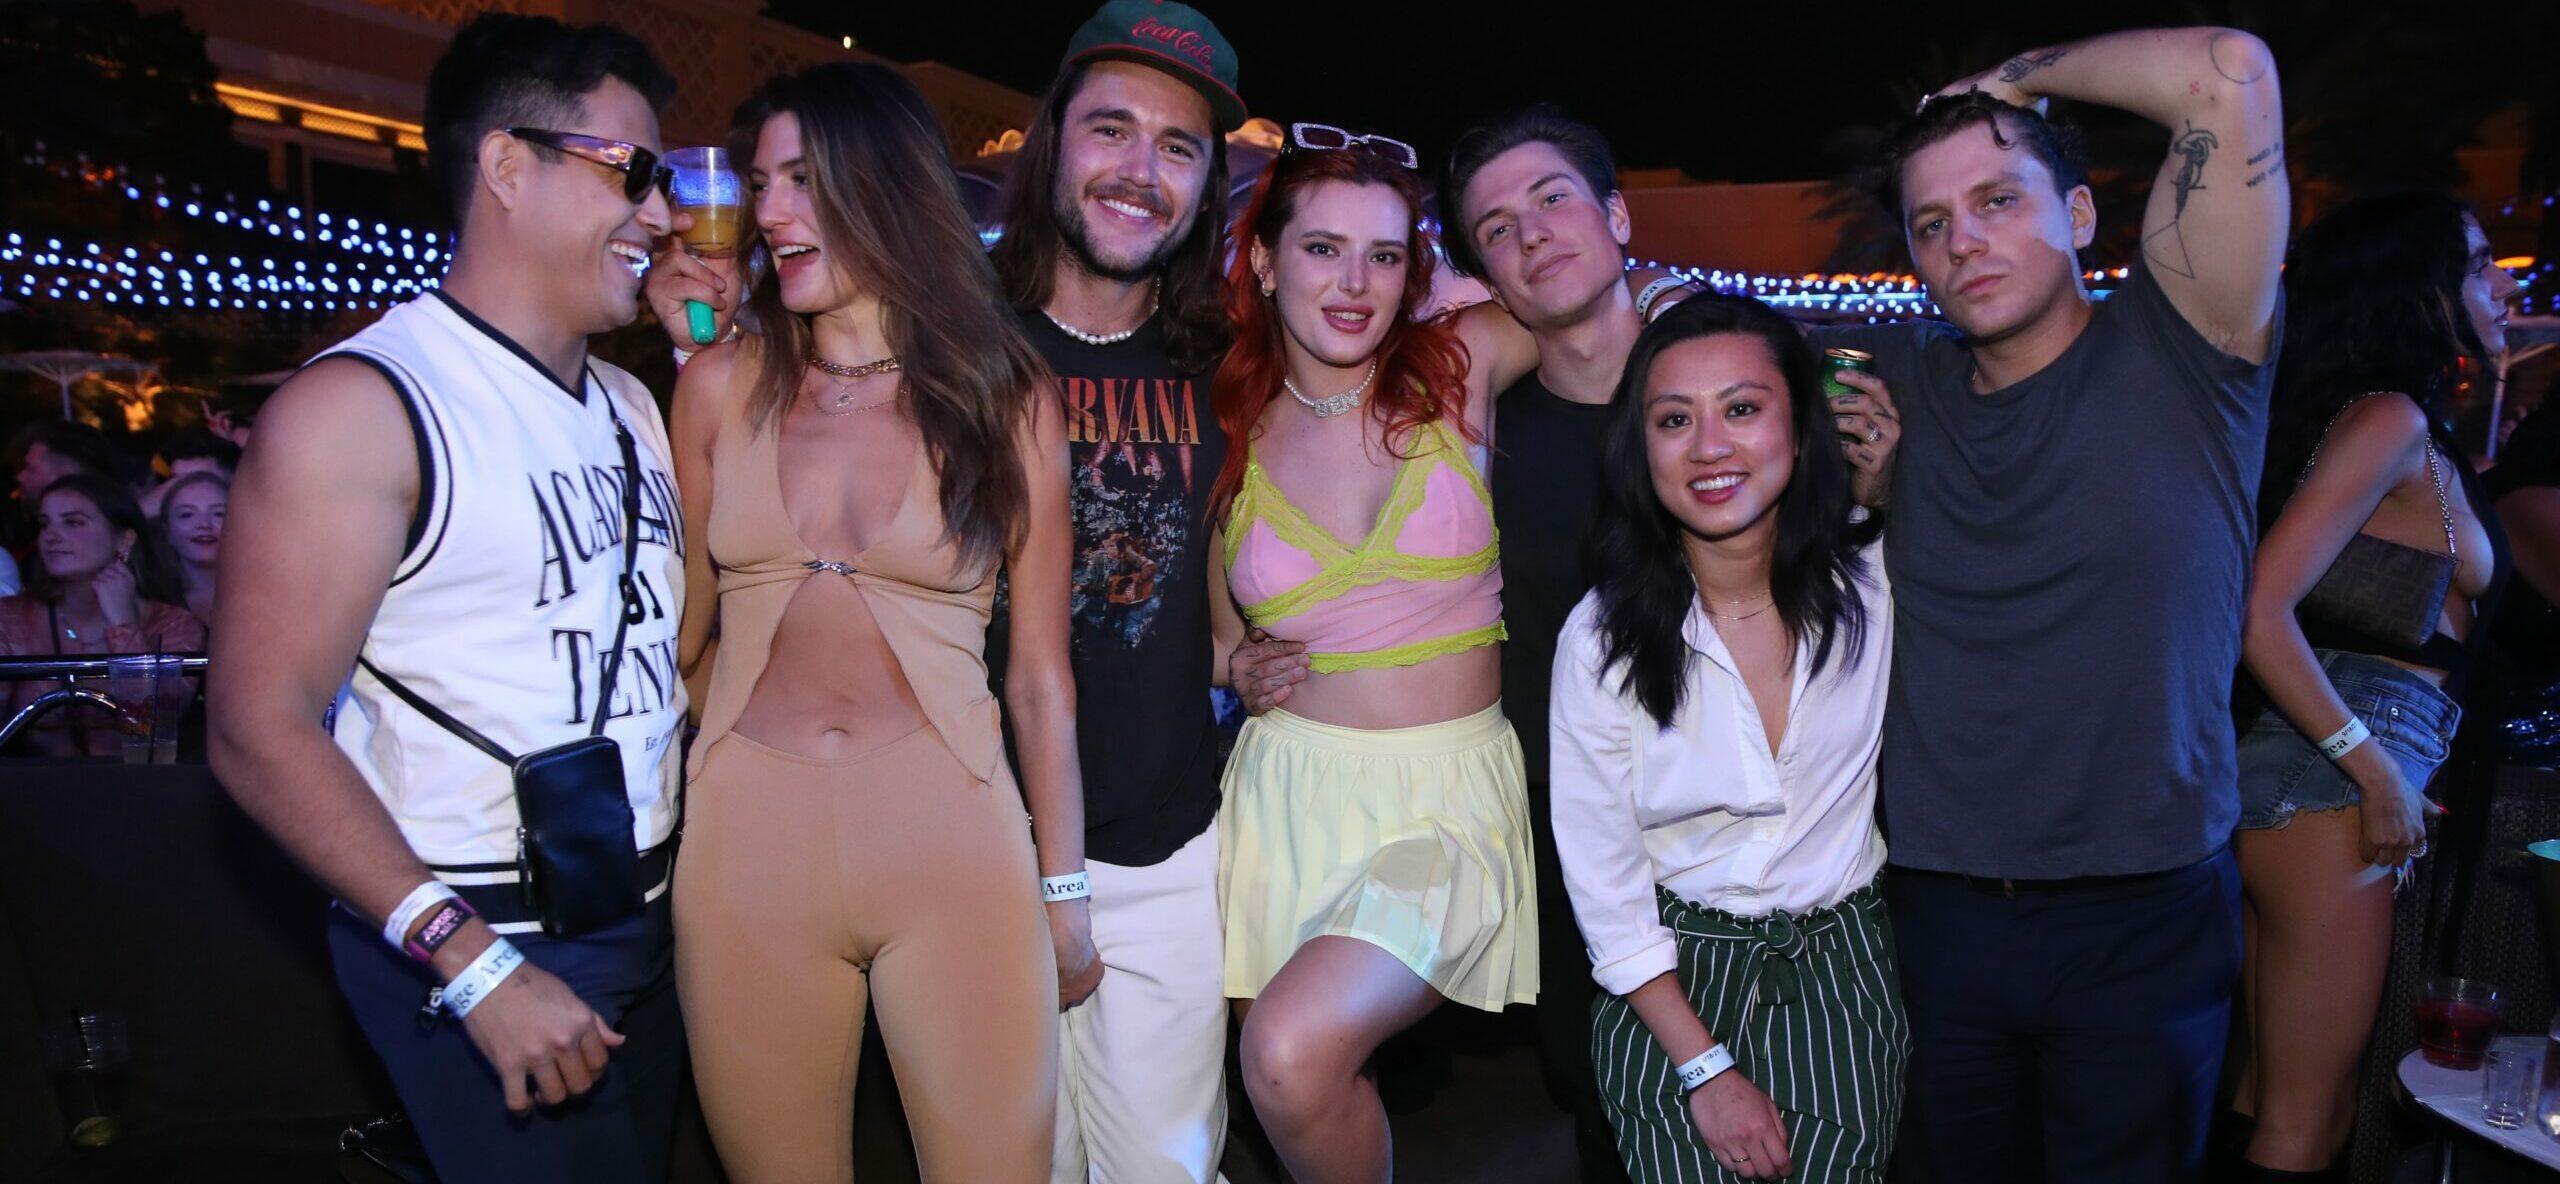 Bella Thorne STUNS At The Wynn, Las Vegas Partying With ‘The Chainsmokers!’